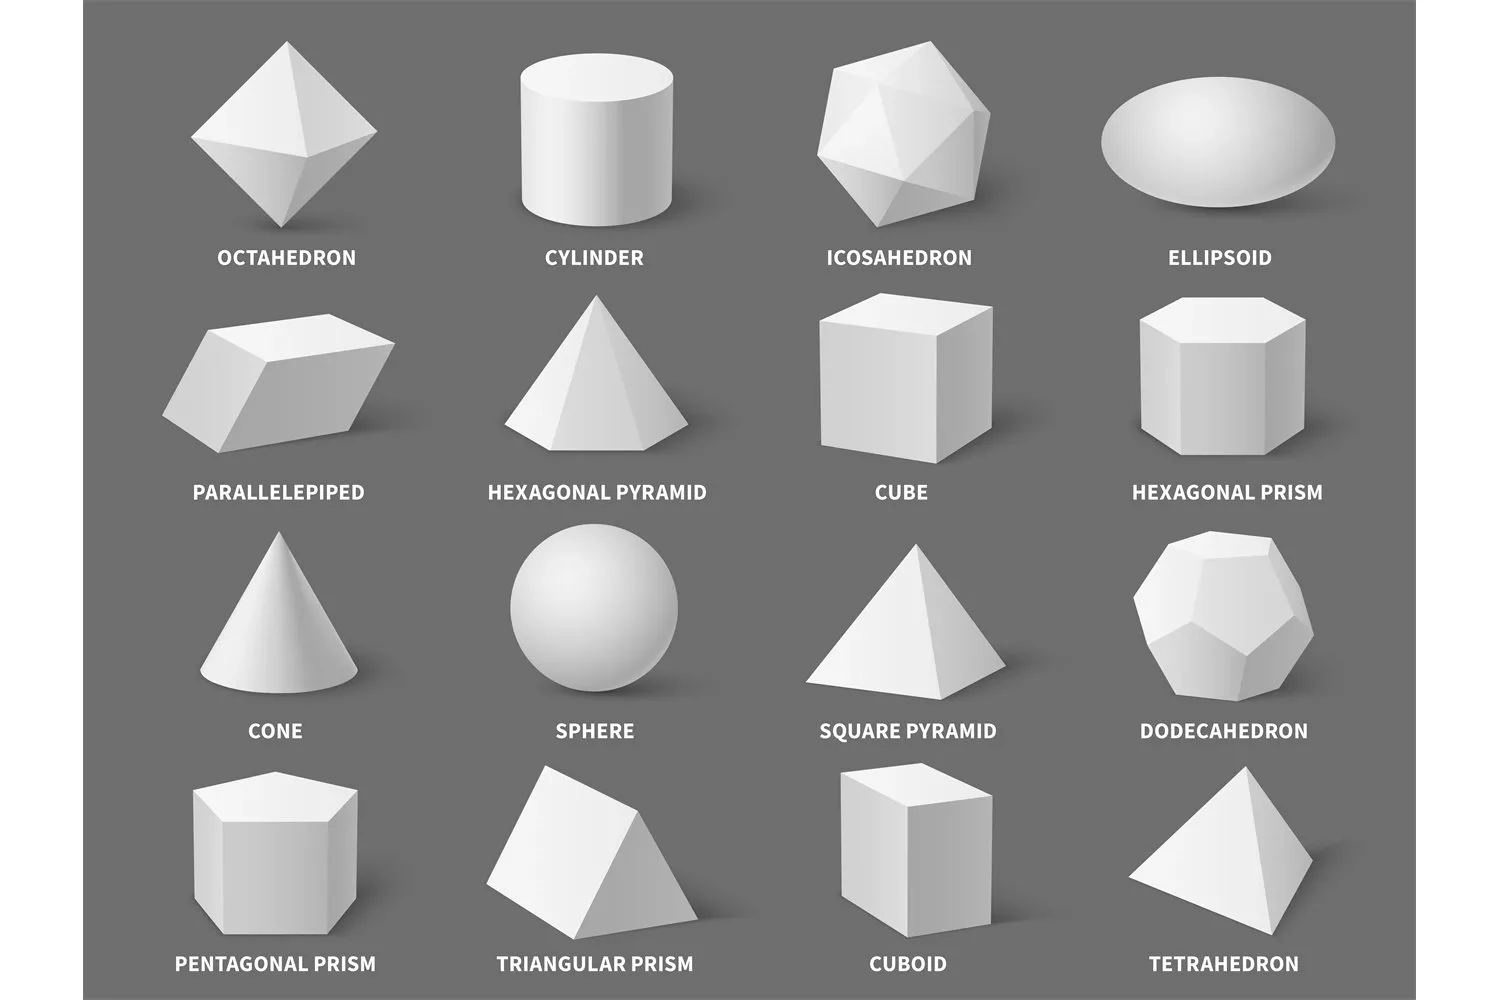 An image that shows various geometries including: an octahedron, cylinder, icosahedron, ellipsoid, parallelepiped, hexagonal pyramid, cube, hexagonal prism, cone, sphere, square pyramid, dodecahedron, pentagonal prism, cuboid and tetrahedron.